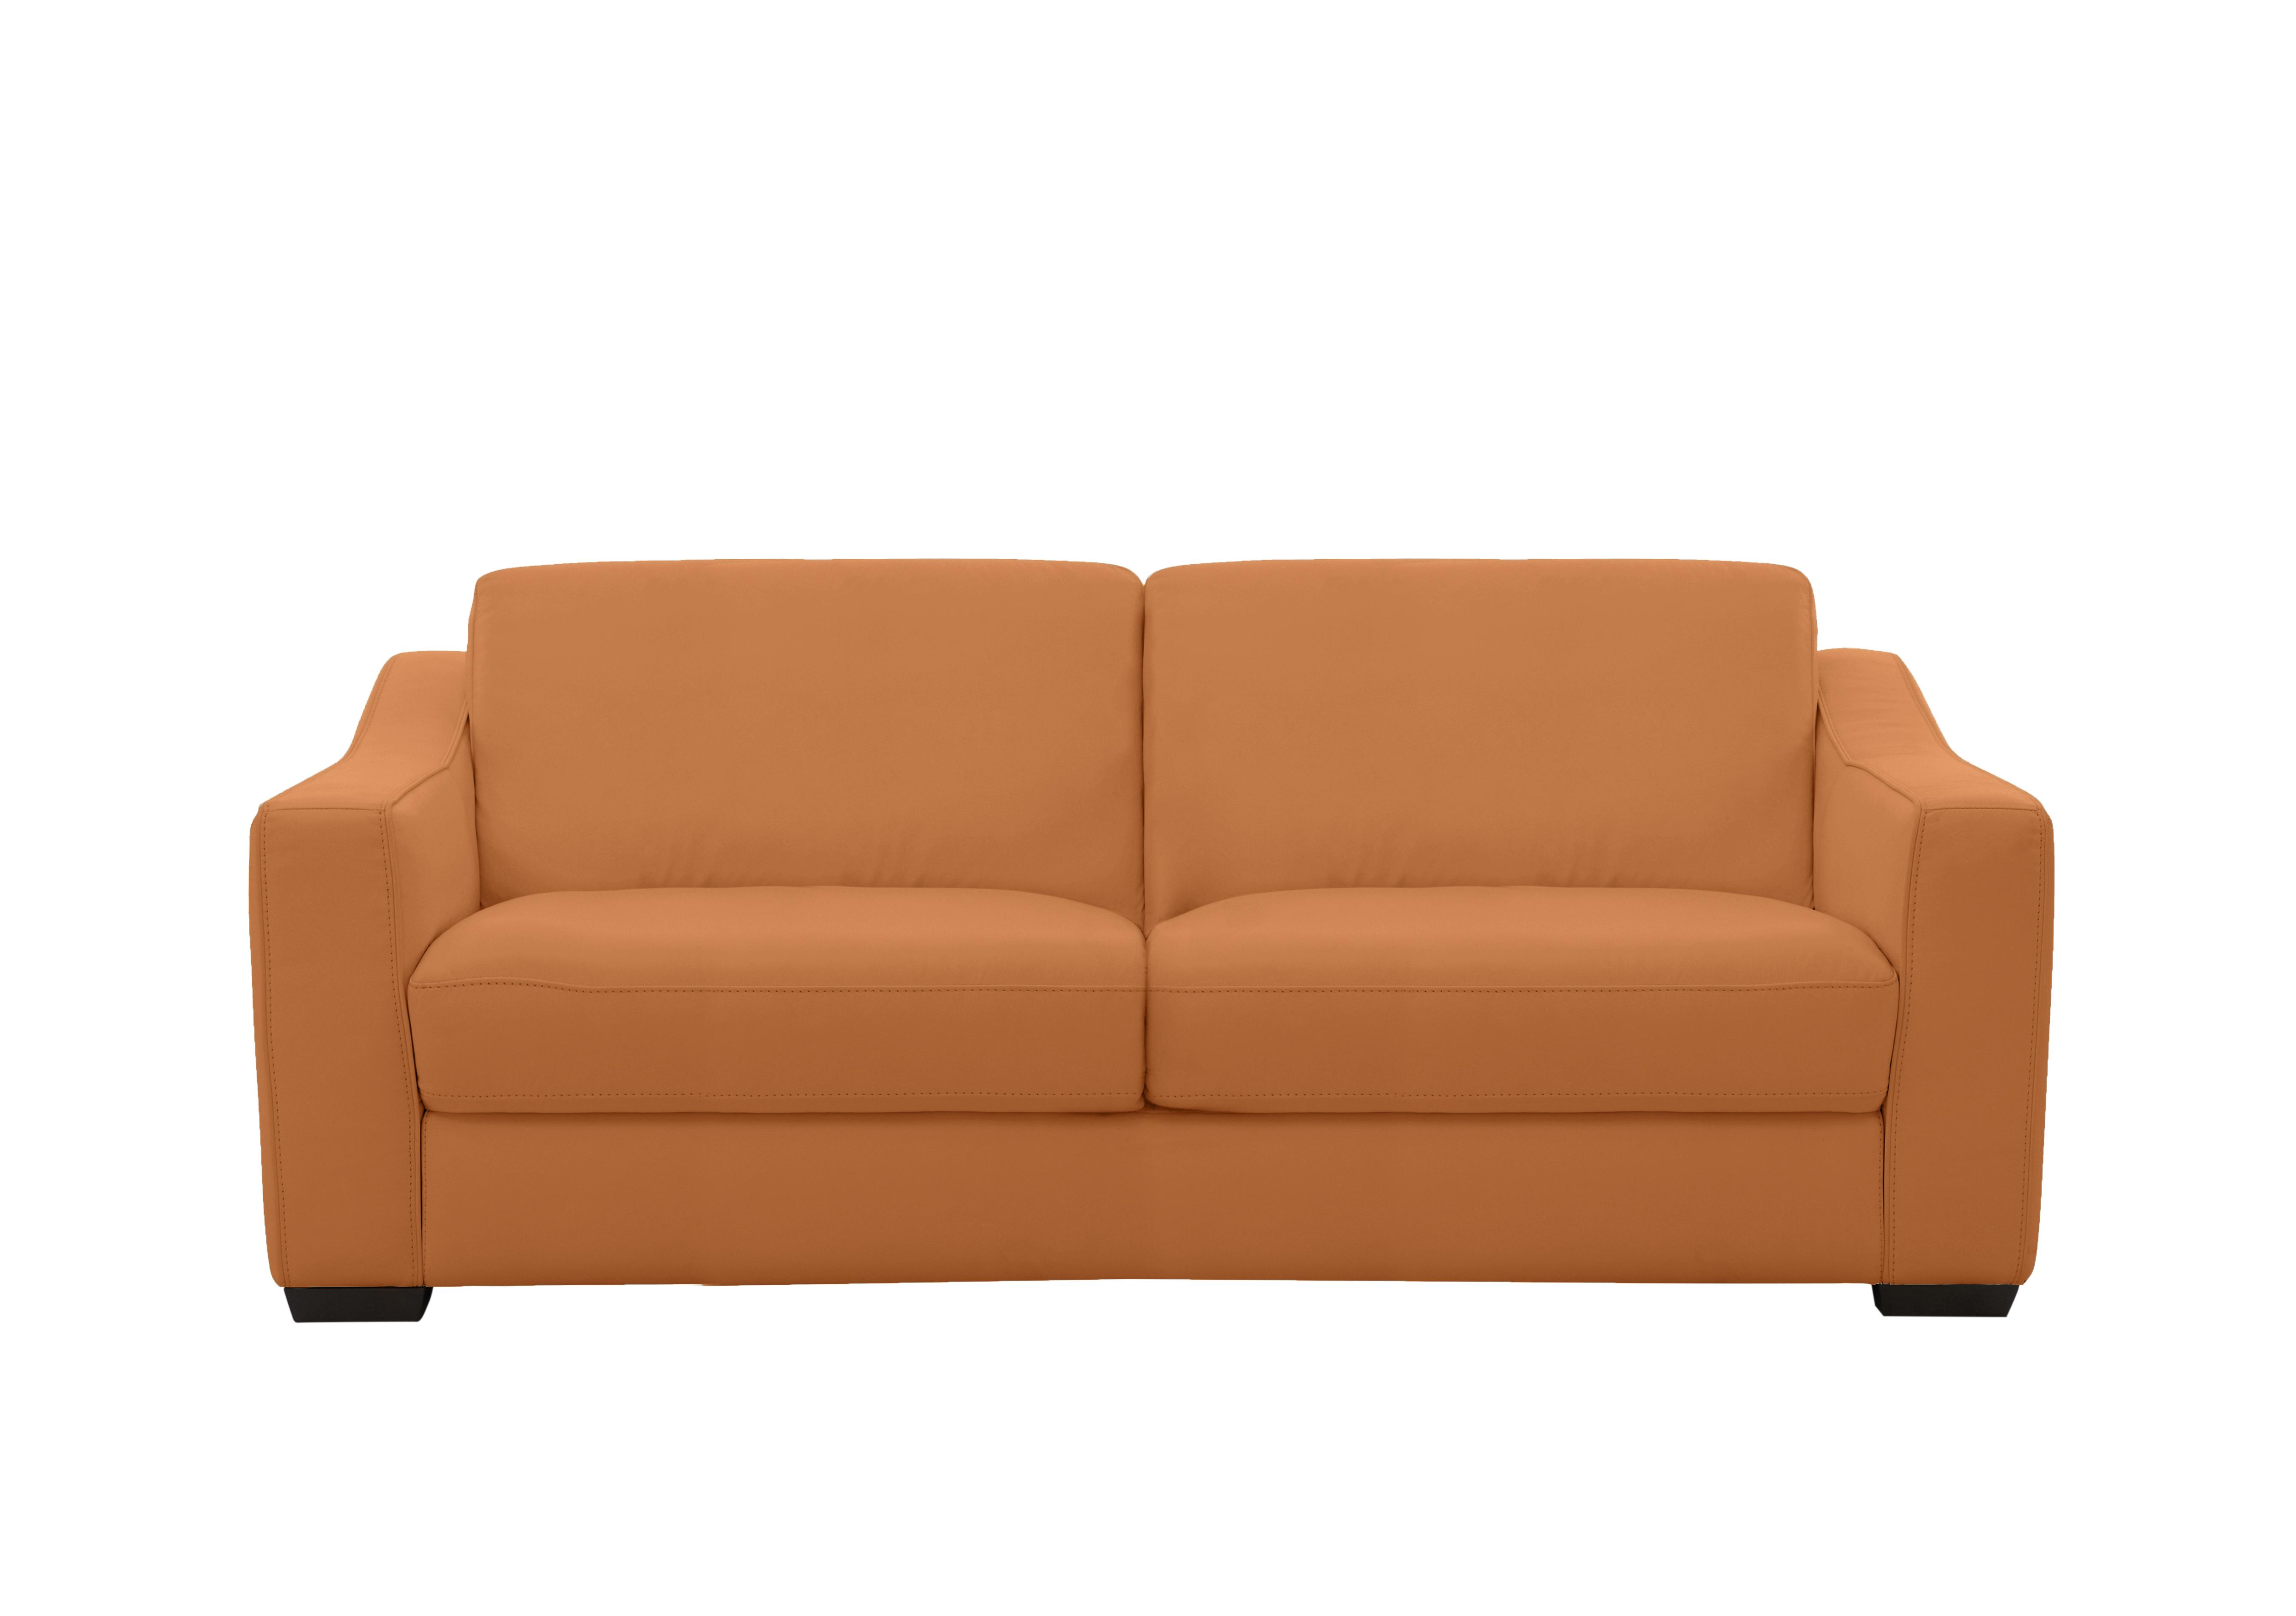 Optimus Space Saving Leather Sofa Bed with Memory Foam Mattress in Bv-335e Honey Yellow on Furniture Village